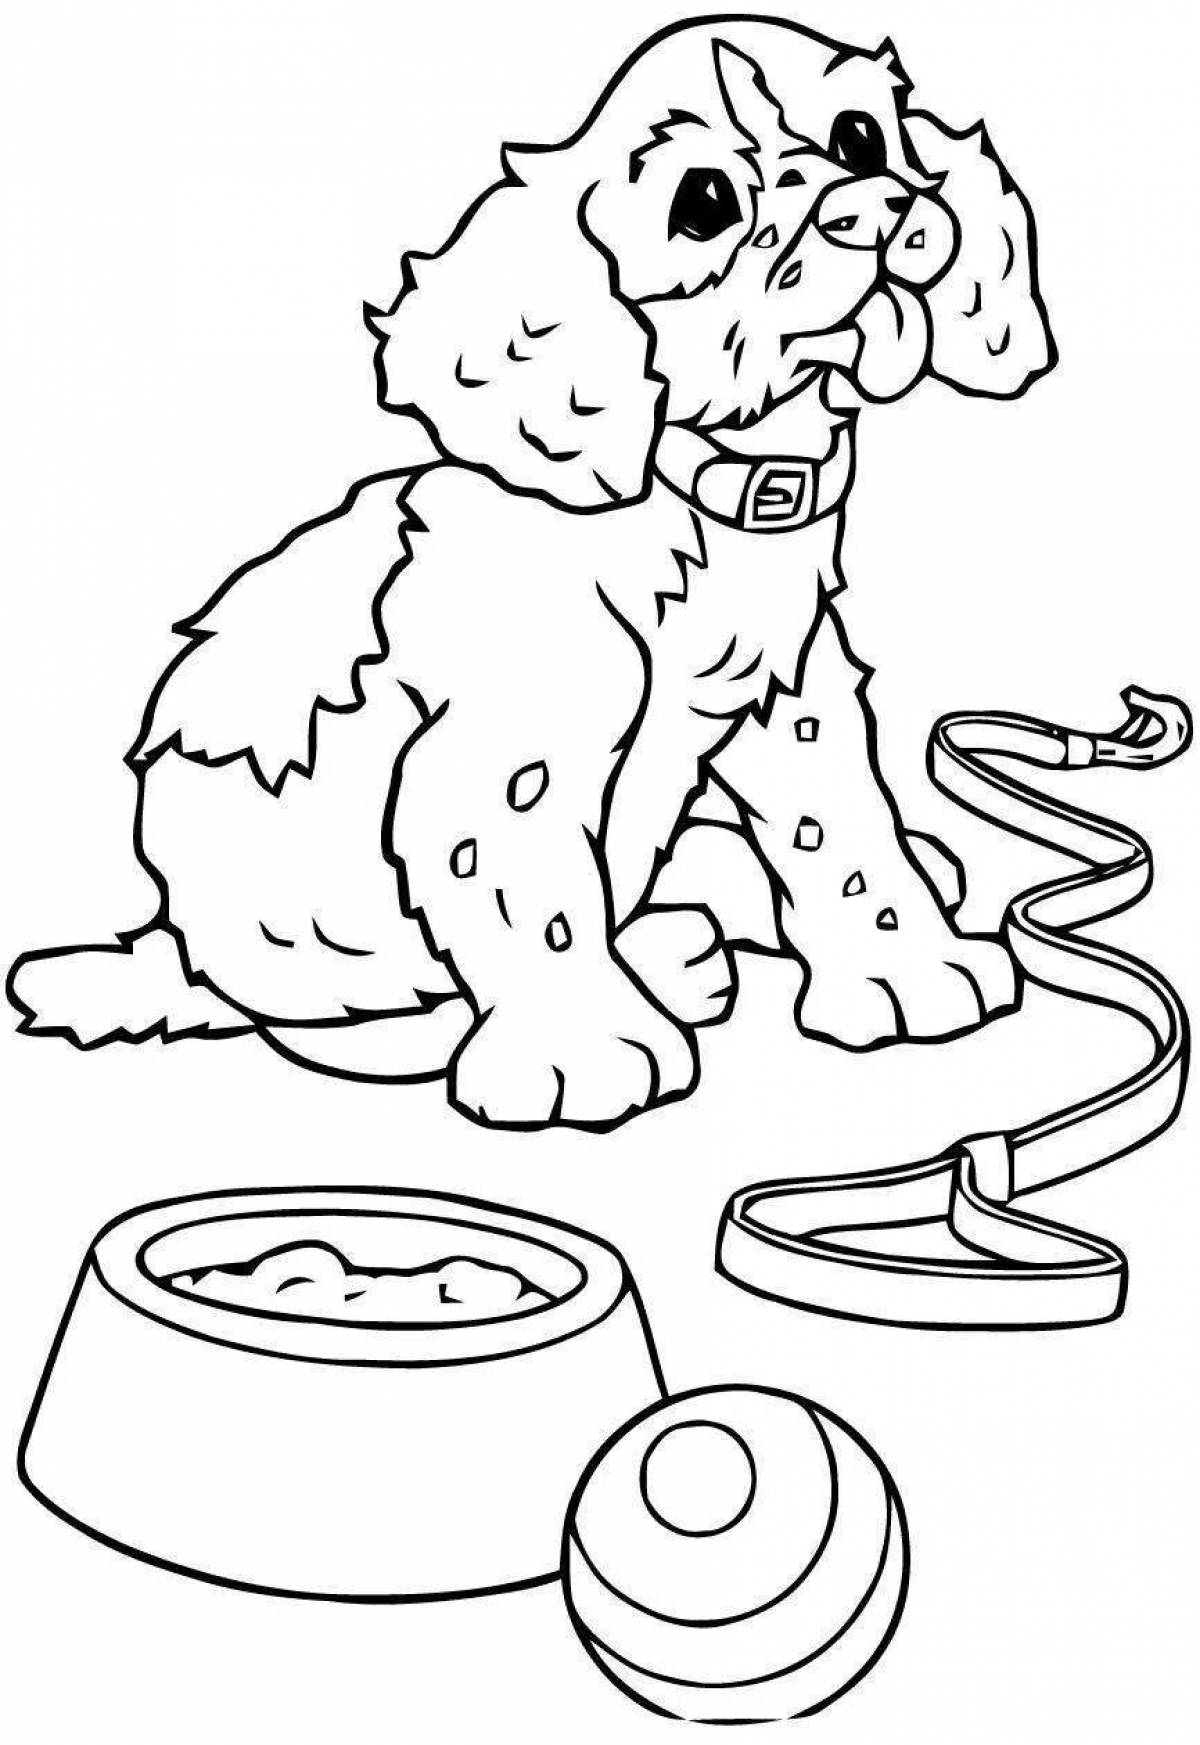 Soft dog and cat coloring book for kids